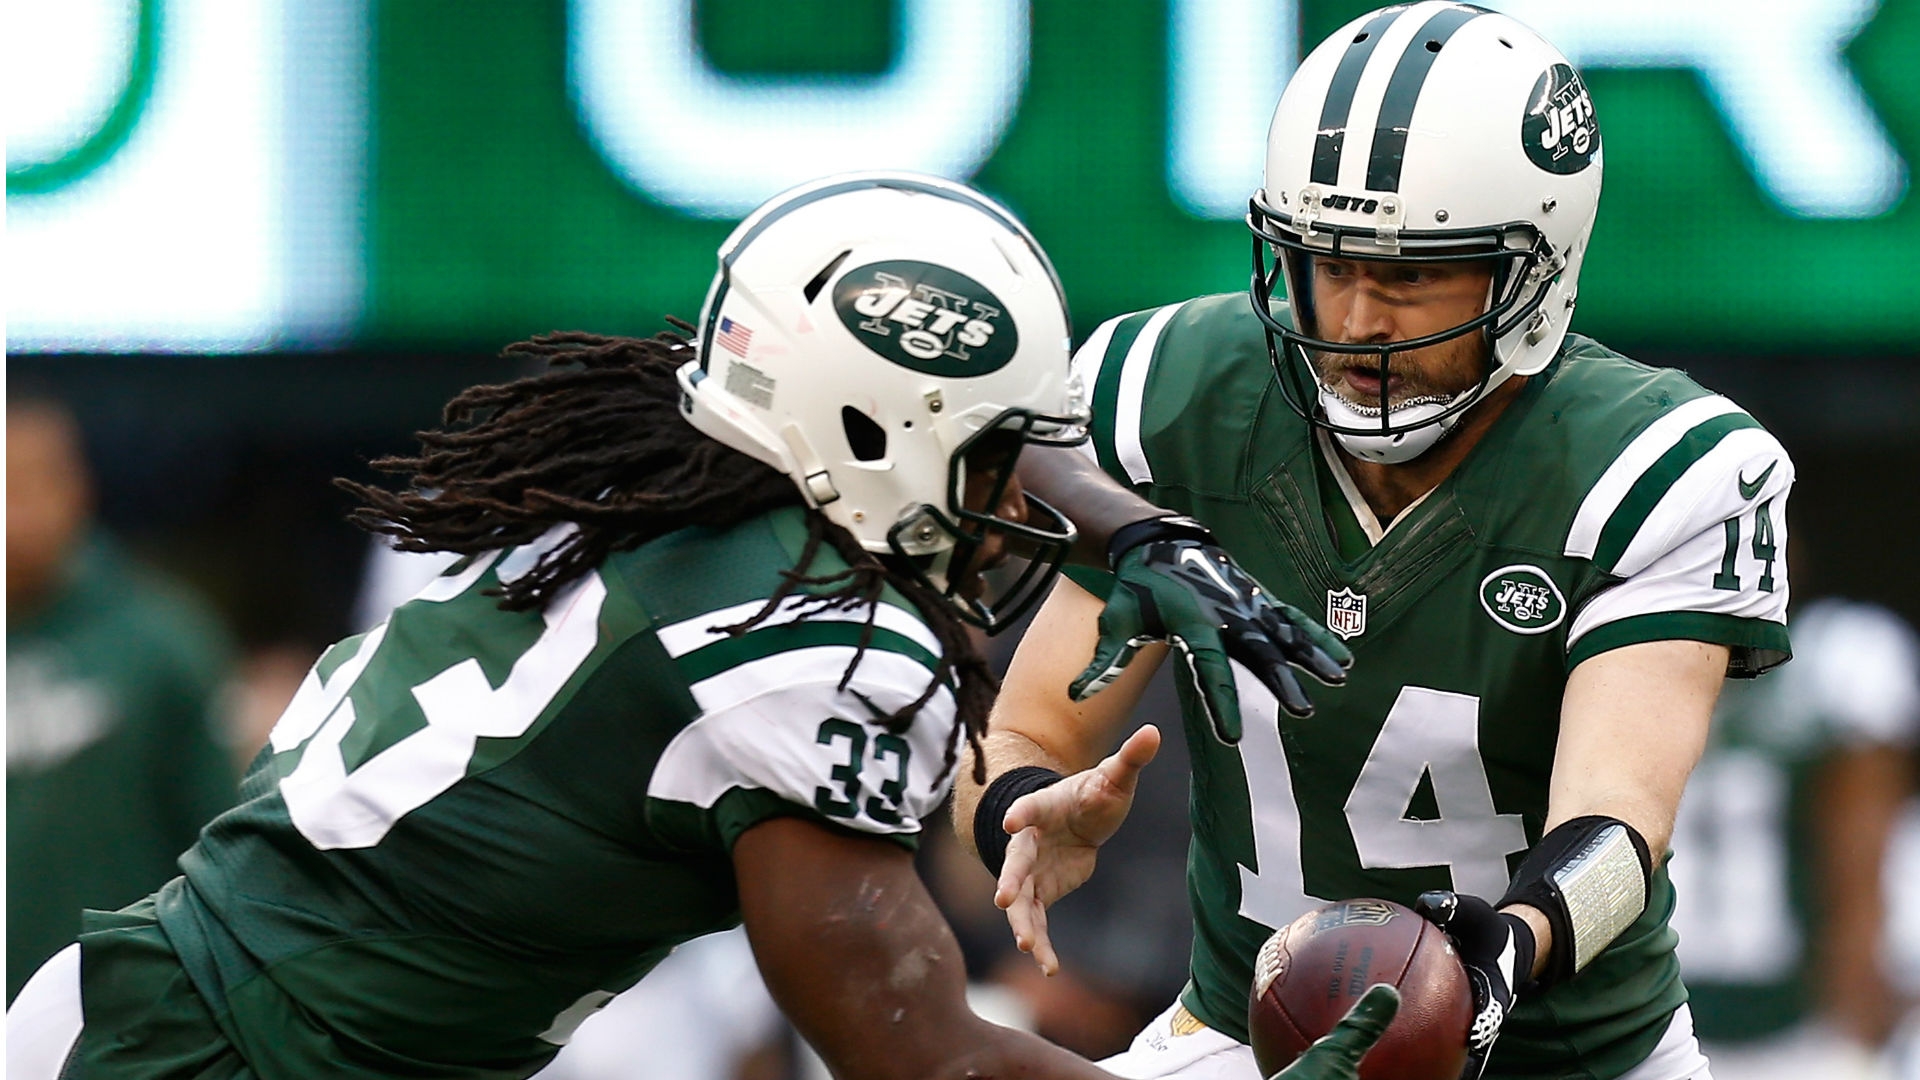 Week 17 NFL picks straight up: Jets clinch playoff spot, Vikings deal Packers blow